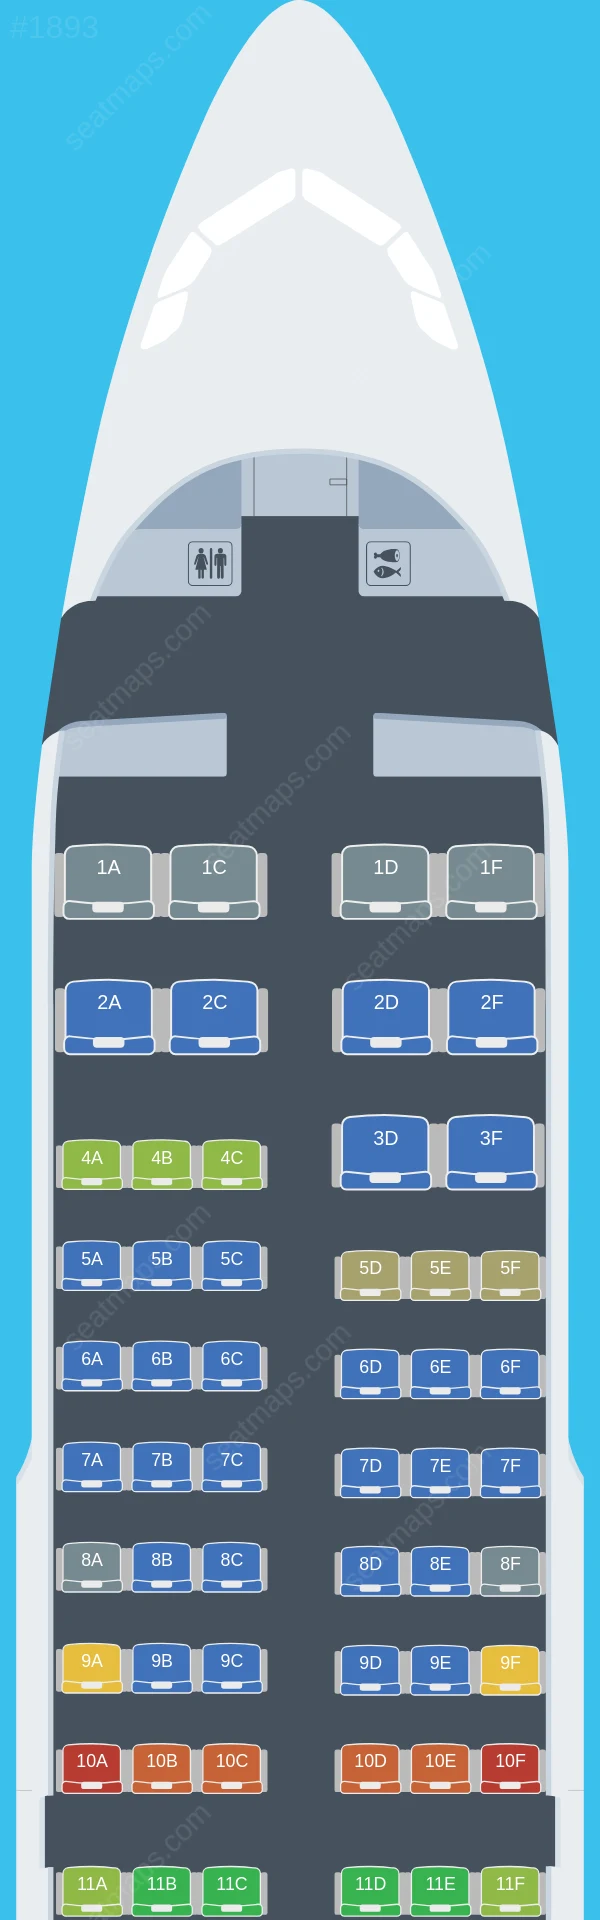 Spirit Airlines Airbus A319-100 seatmap preview